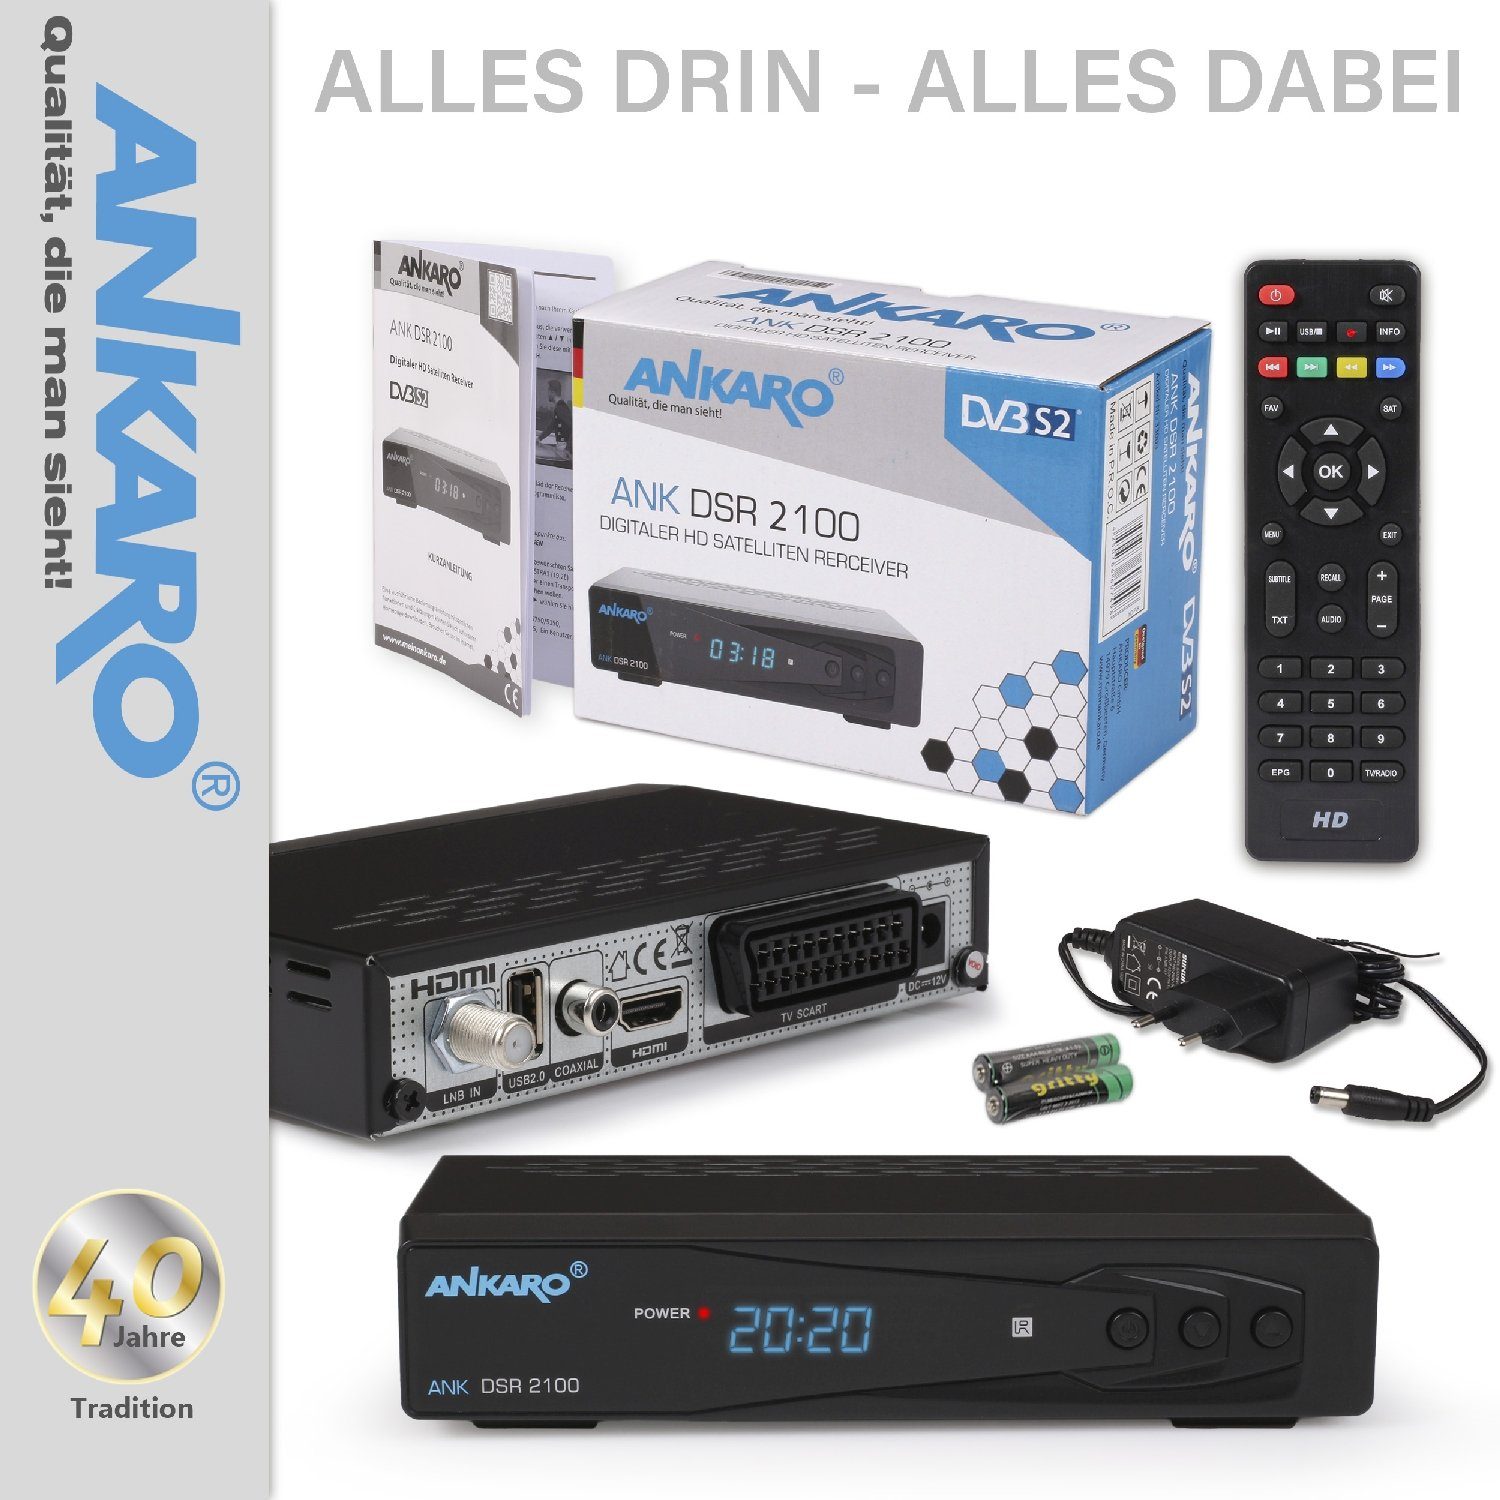 DSR HDMI Timeshift Aufnahmefunktion (PVR, USB, Coaxial mit tauglich) SCART, HDMI, Kabel - SAT-Receiver + & Unicable 2100 Ankaro